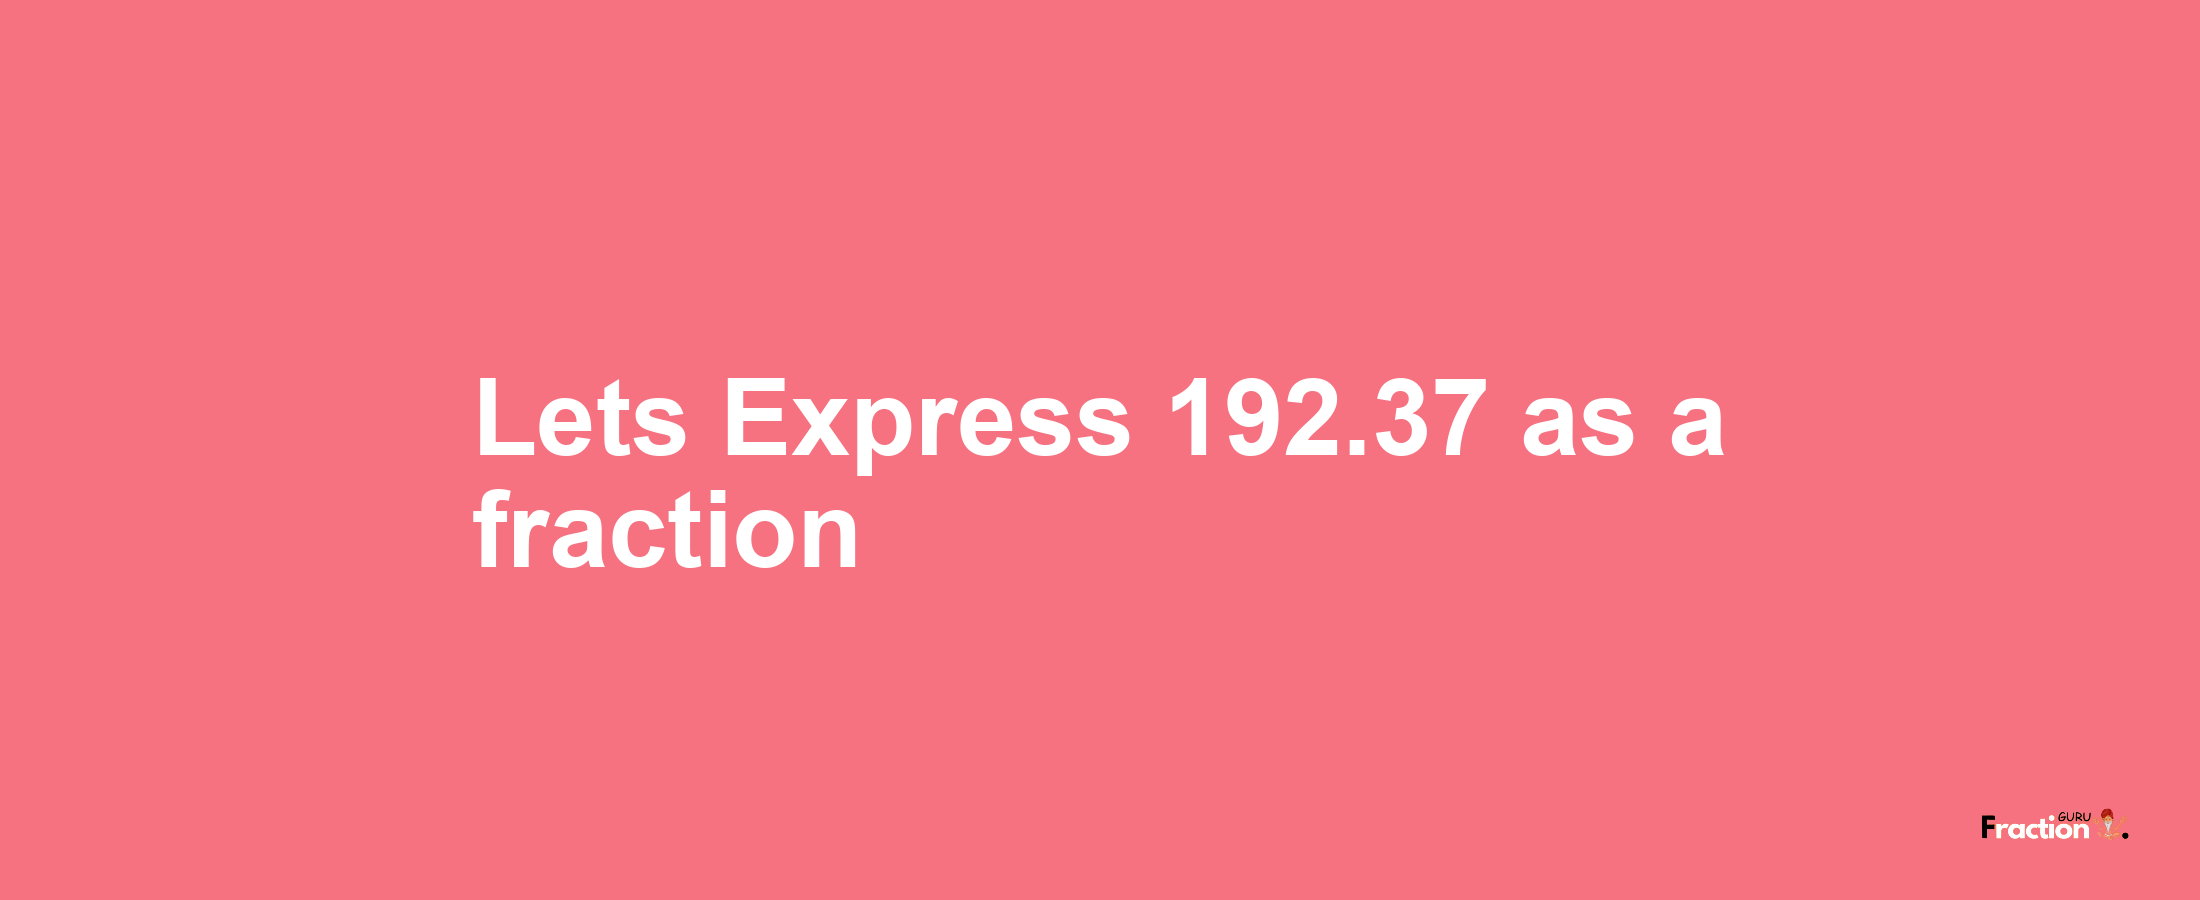 Lets Express 192.37 as afraction